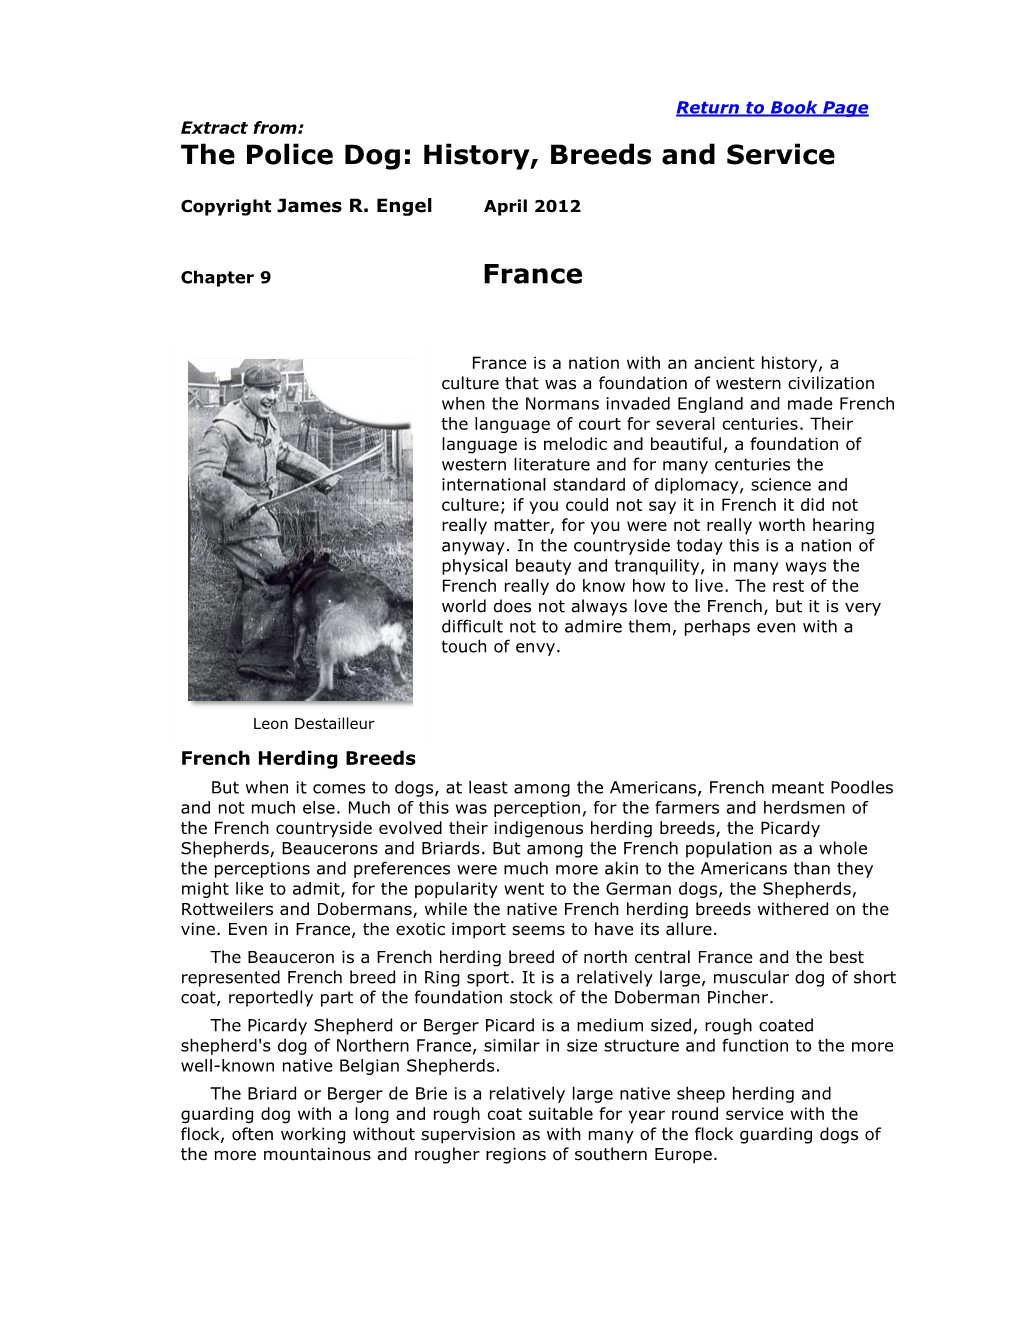 The Police Dog: History, Breeds and Service